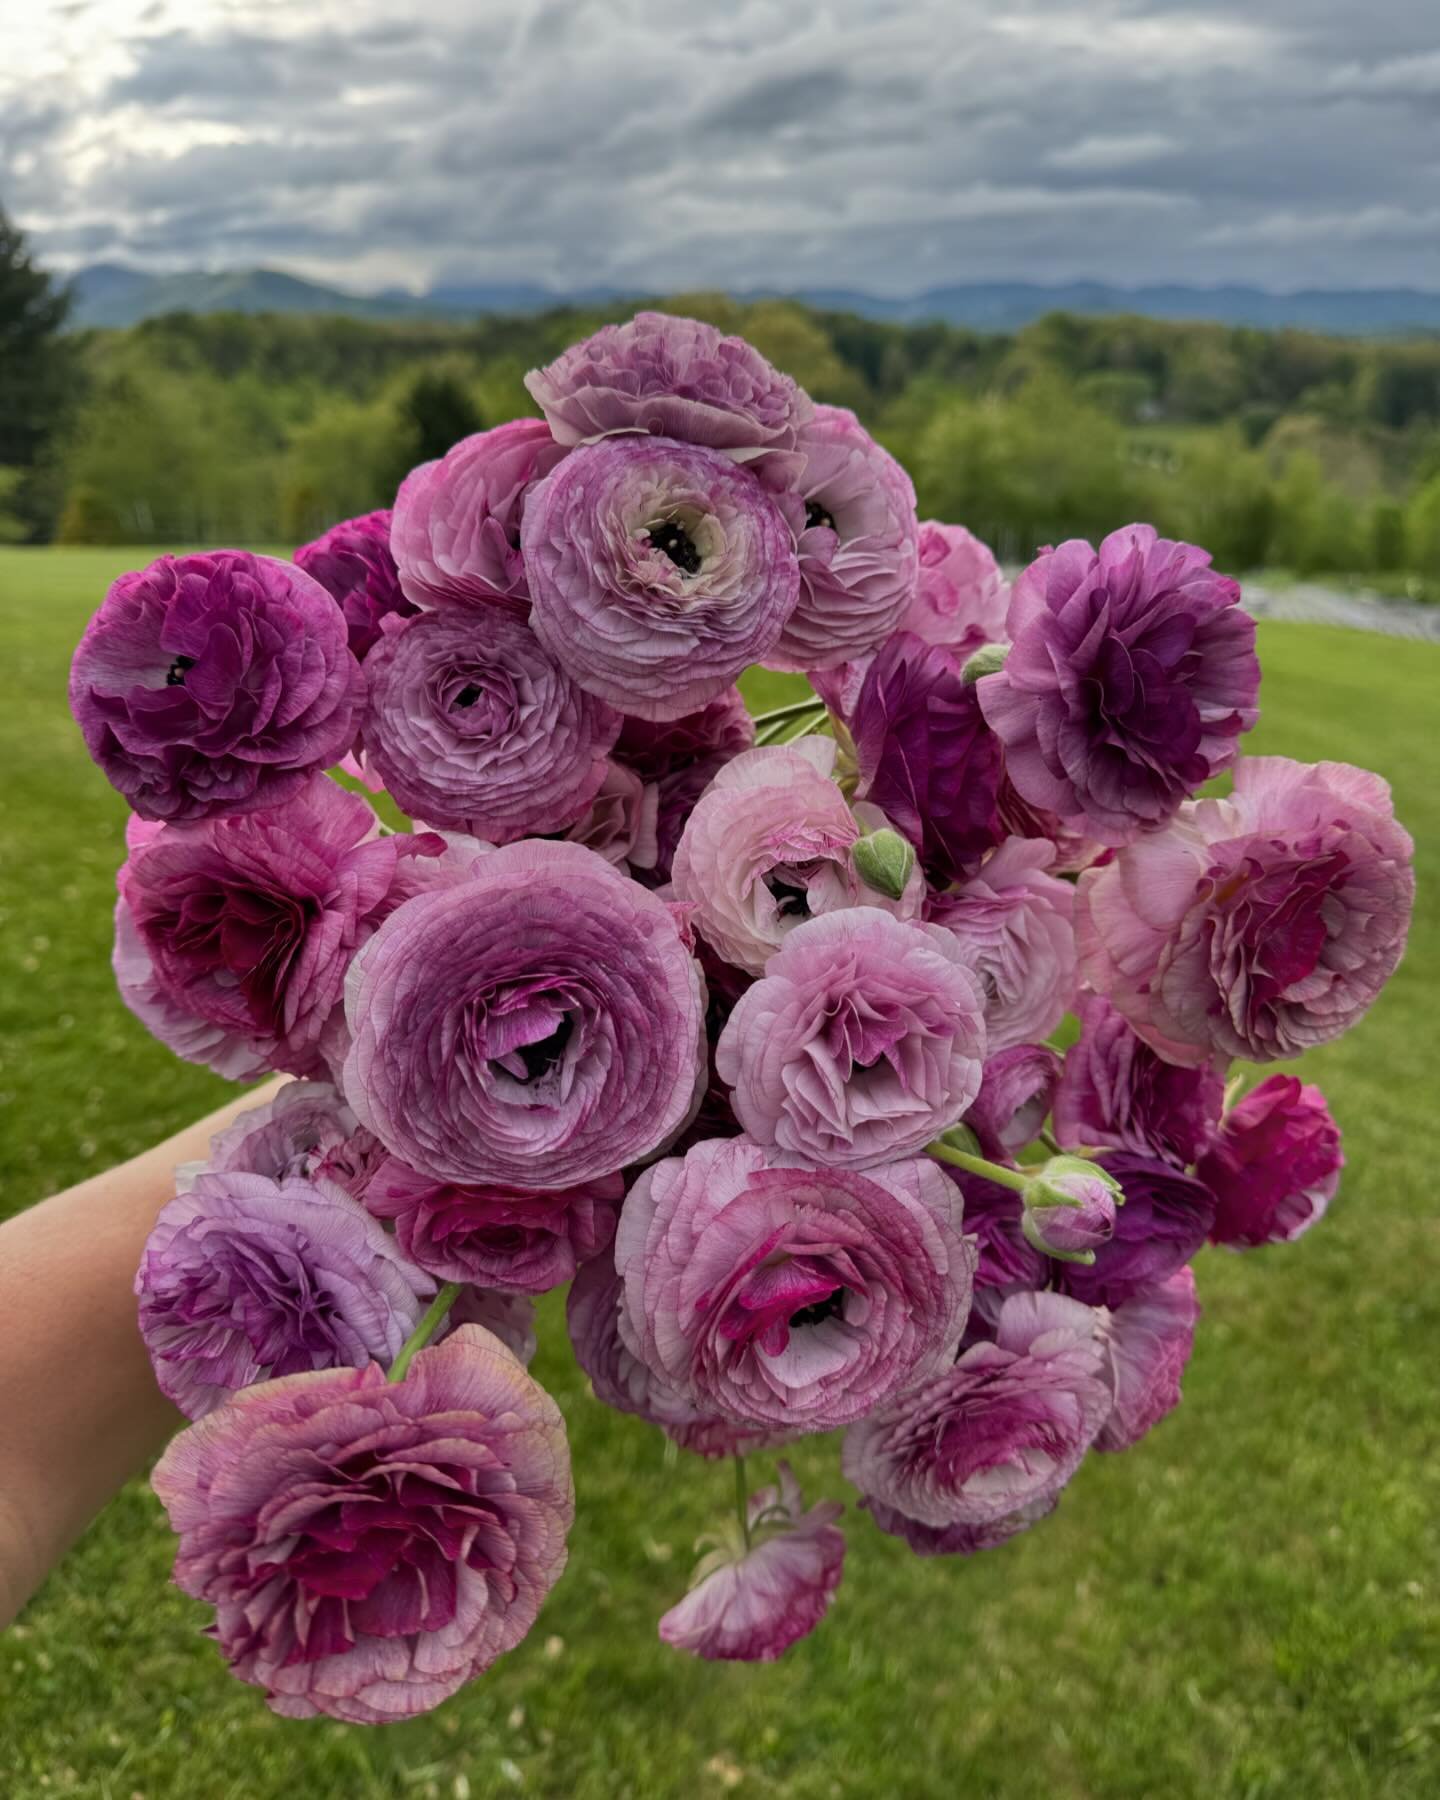 &ldquo;I love spring anywhere, but if I could choose I would greet it in a garden.&rdquo; ~ Ruth Stout

Each day something new is blooming on the farm, and it can feel challenging to keep up with it all ~ Ranunculus, poppies, peonies, bearded iris, b